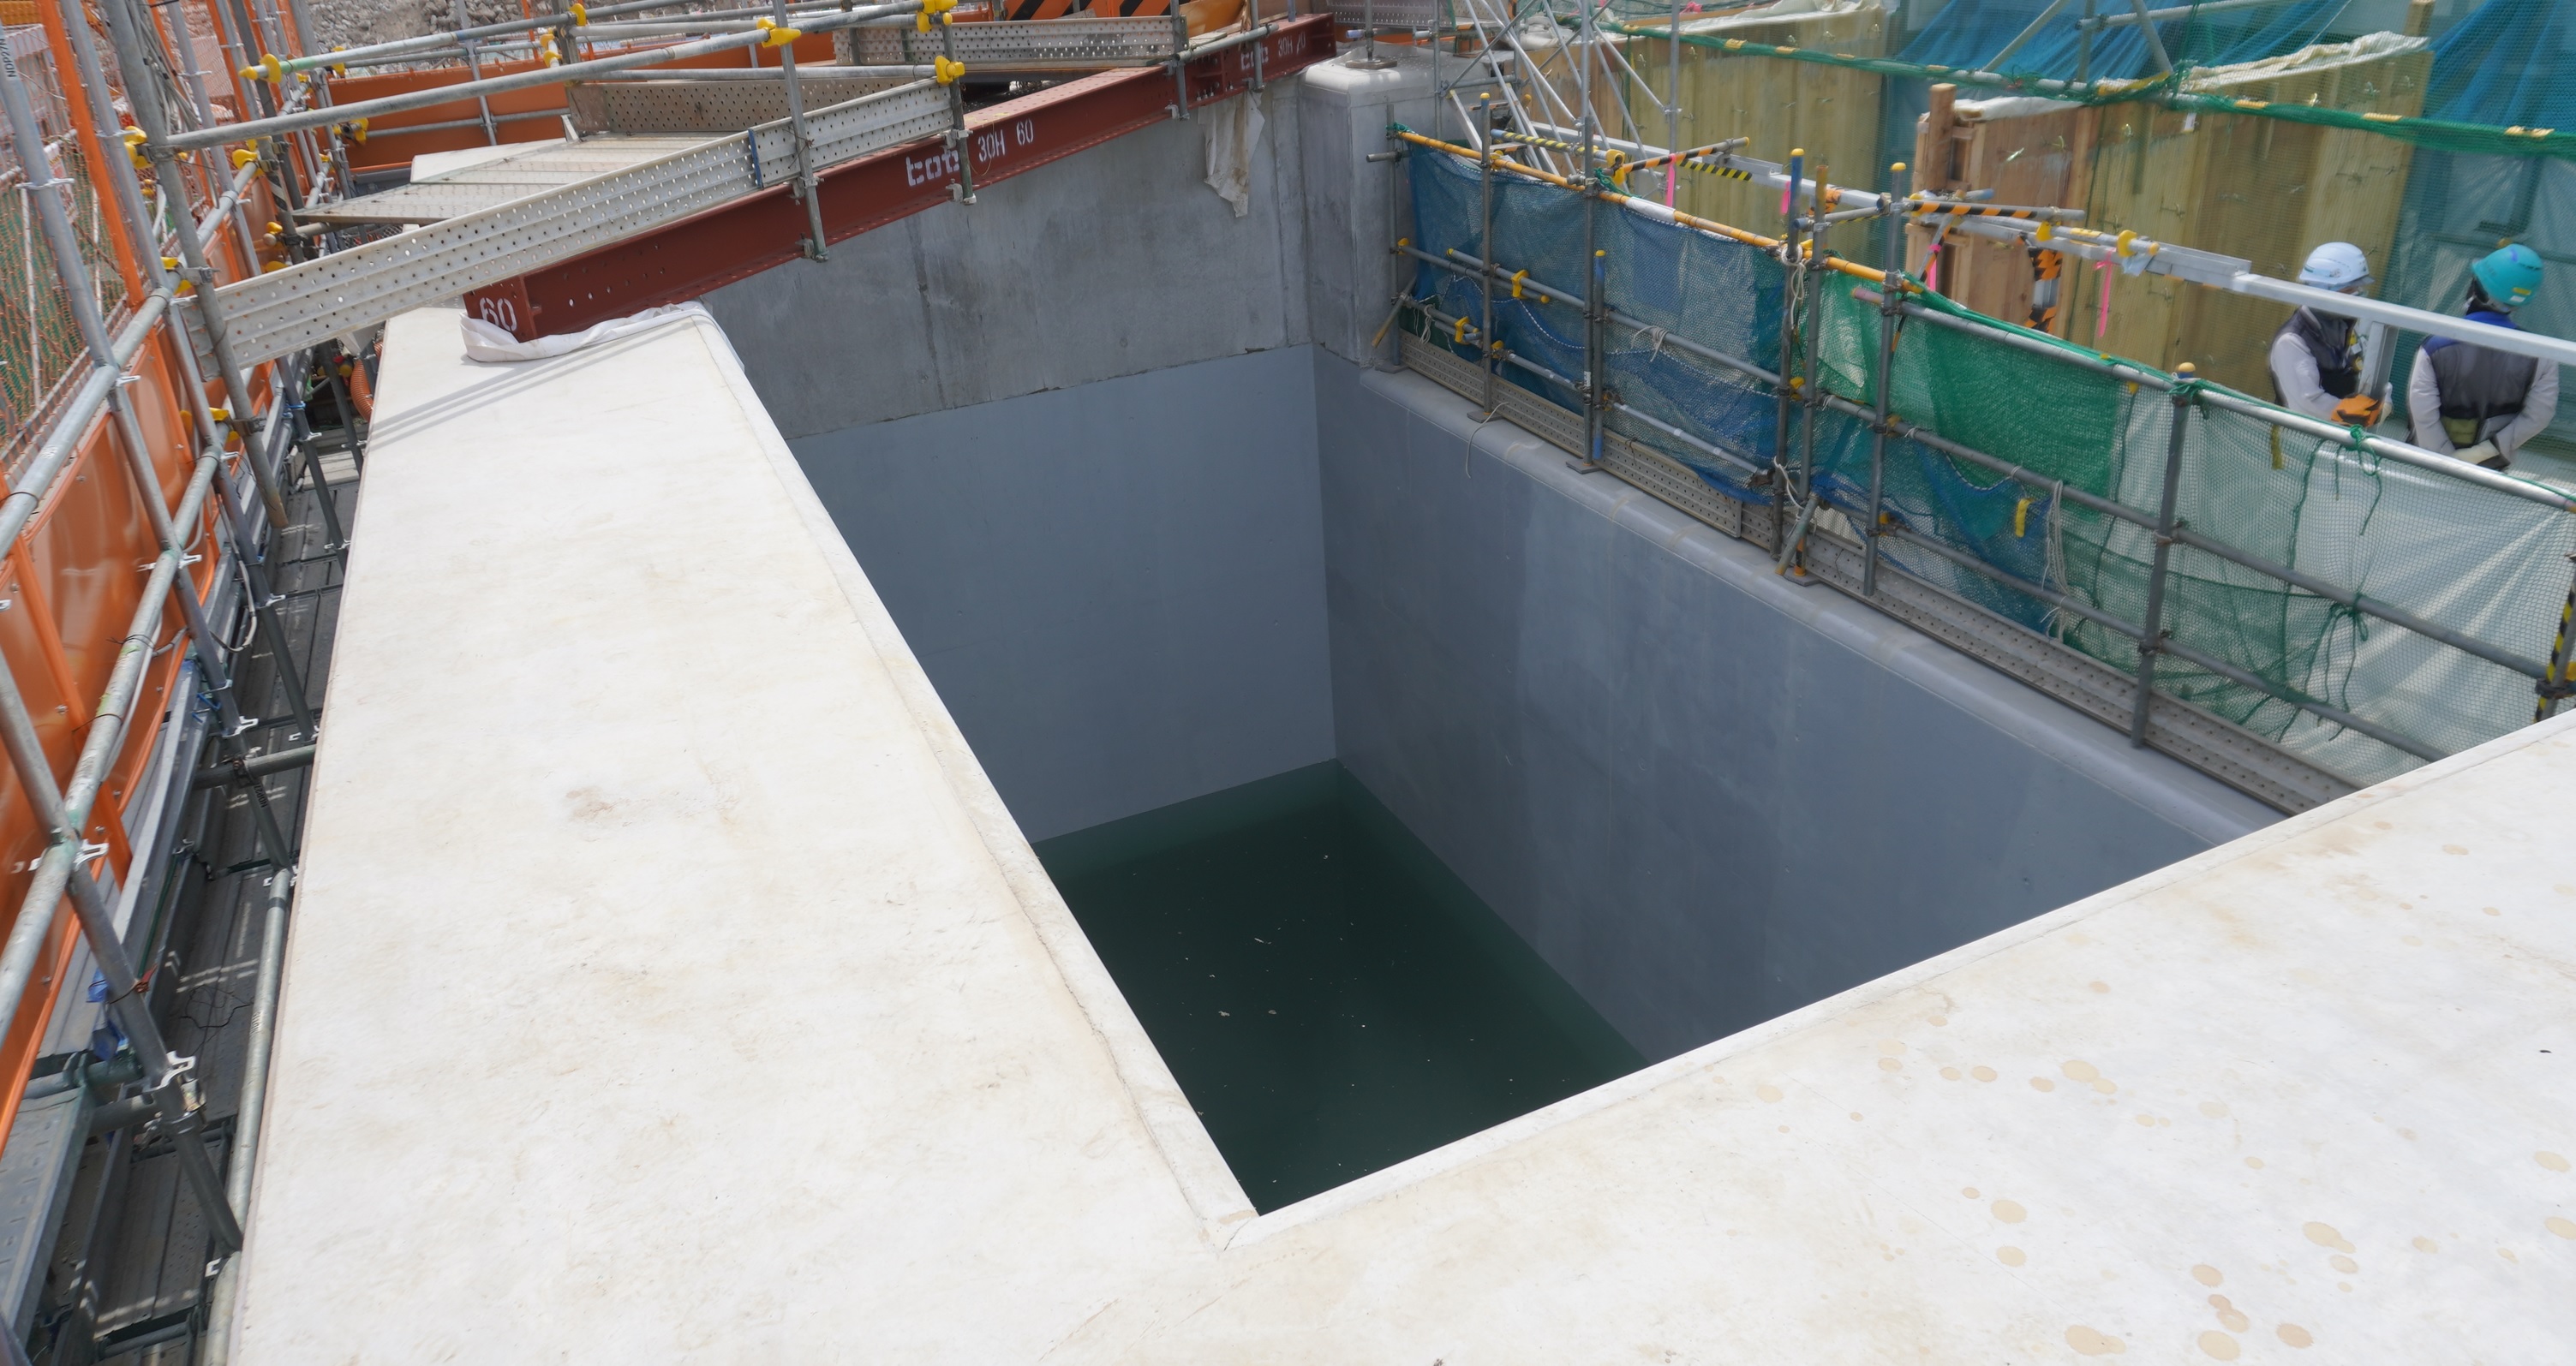 Down-stream storage after completion of water filling